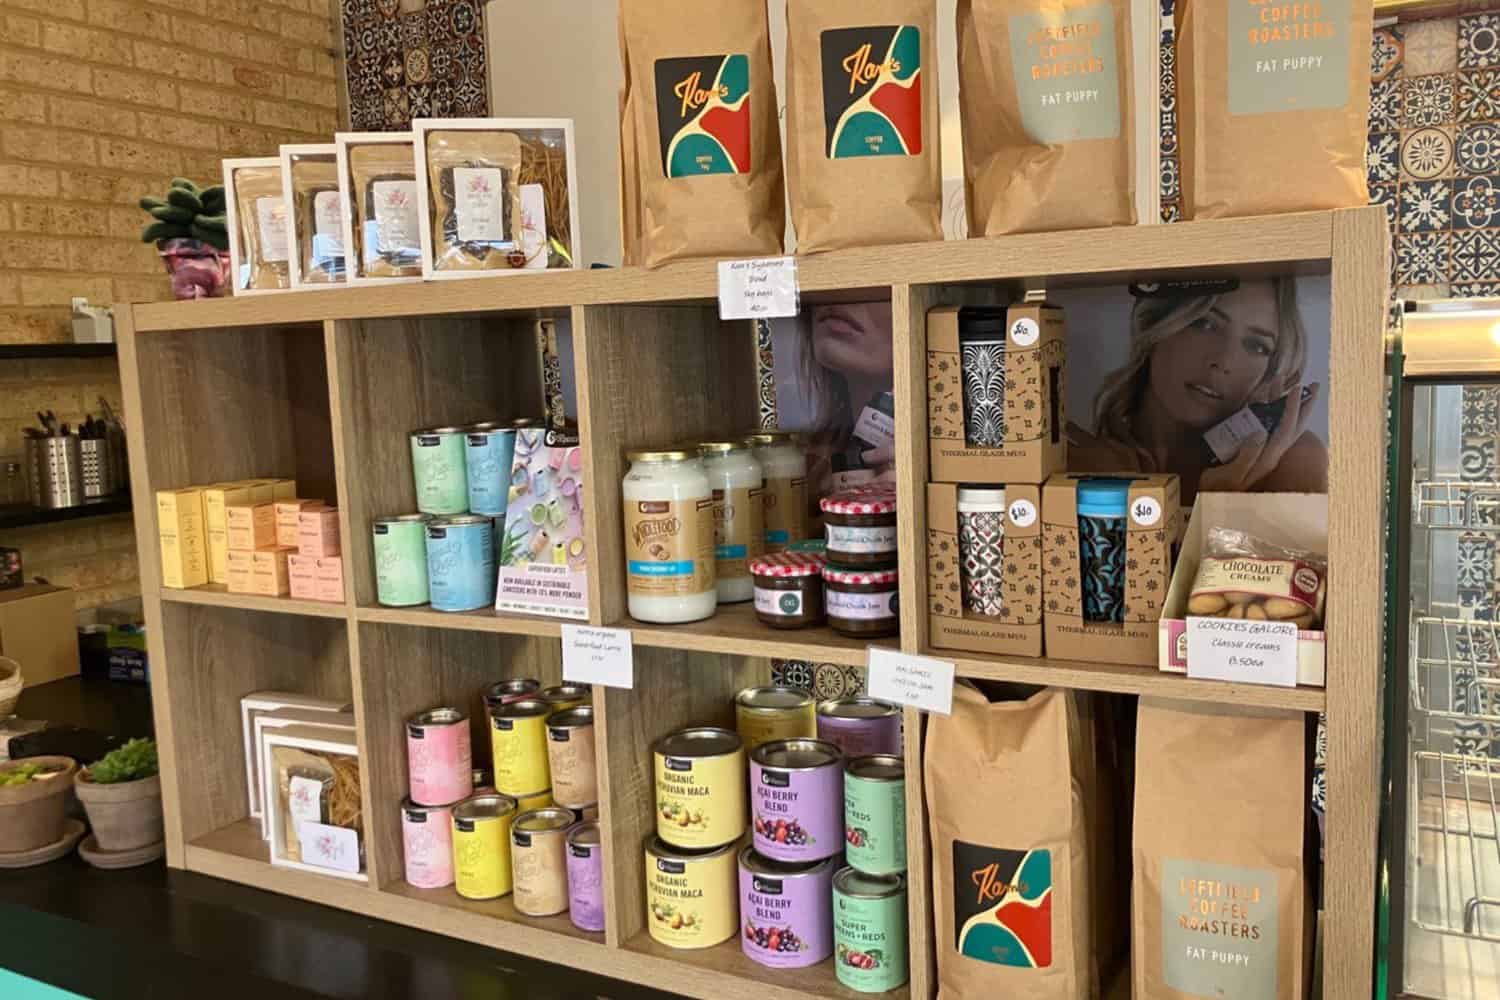 An enticing display of coffee beans and related items at a cafe in Margaret River. The image showcases a shelf adorned with various coffee bean packages, grinders, and brewing equipment, inviting visitors to explore the world of coffee. The assortment of beans promises the best coffee in Margaret River, with each package showcasing its unique flavors and origins